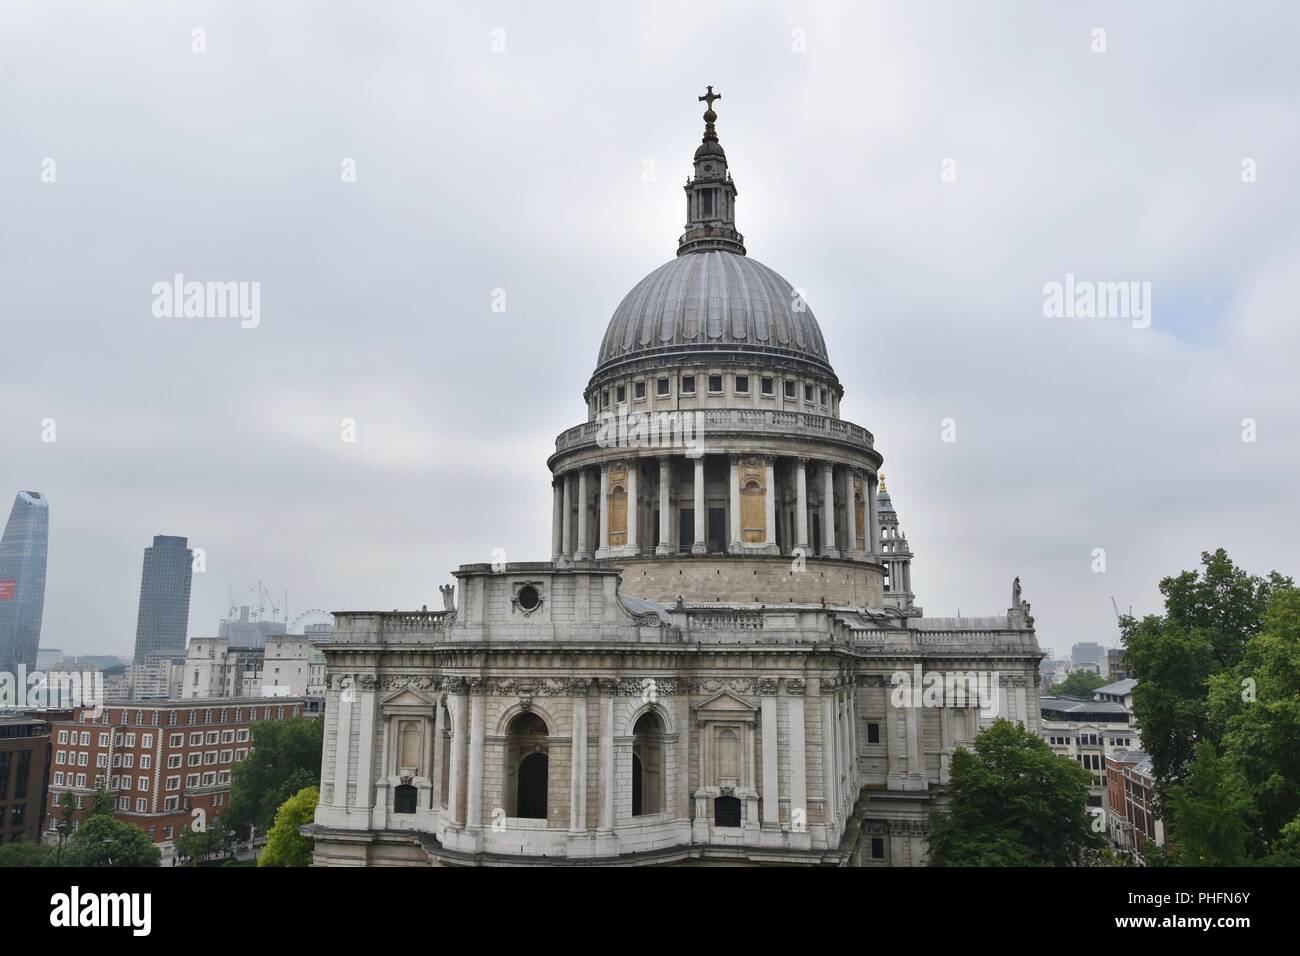 Saint Paul’s Cathedral seen from One New Change, City of London, England, United Kingdom Stock Photo